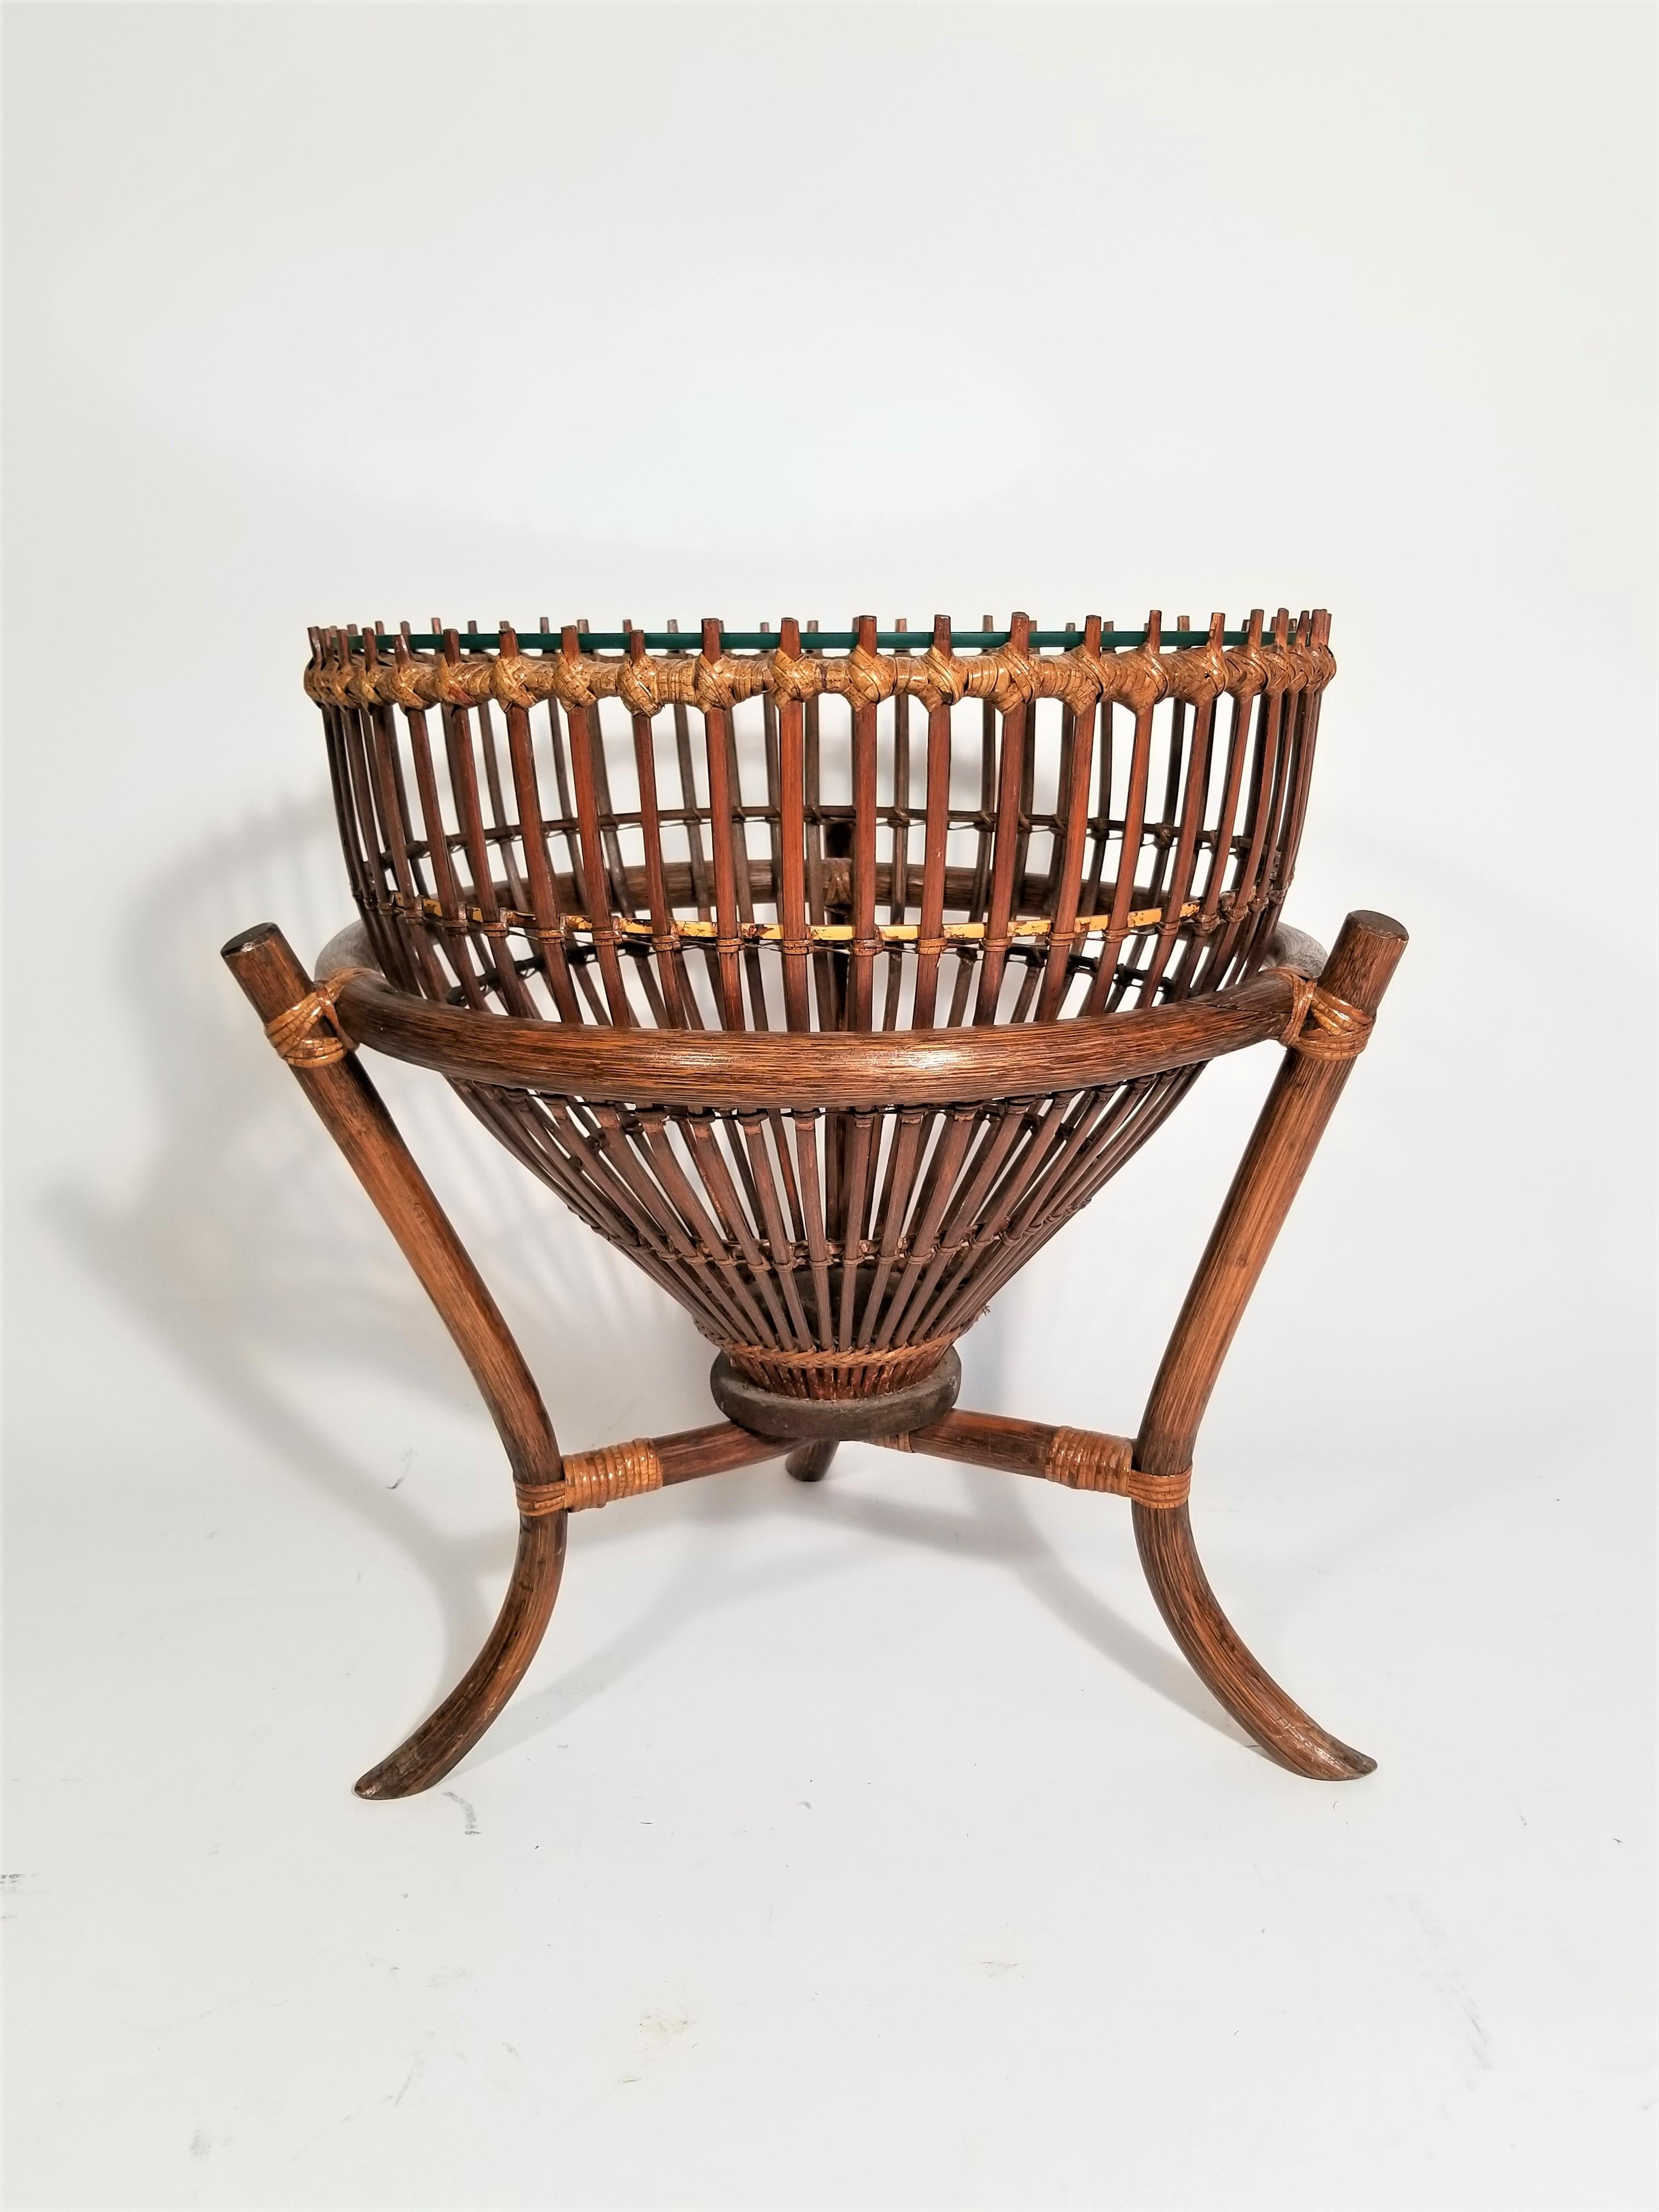 Stunning and unique midcentury Franco Albini style rattan fishing basket table. Side table or end table. We also have 2 available in a larger size. 
Glass top is new and in excellent condition.
Quarter inch plated glass.
Glass top diameter 18.25